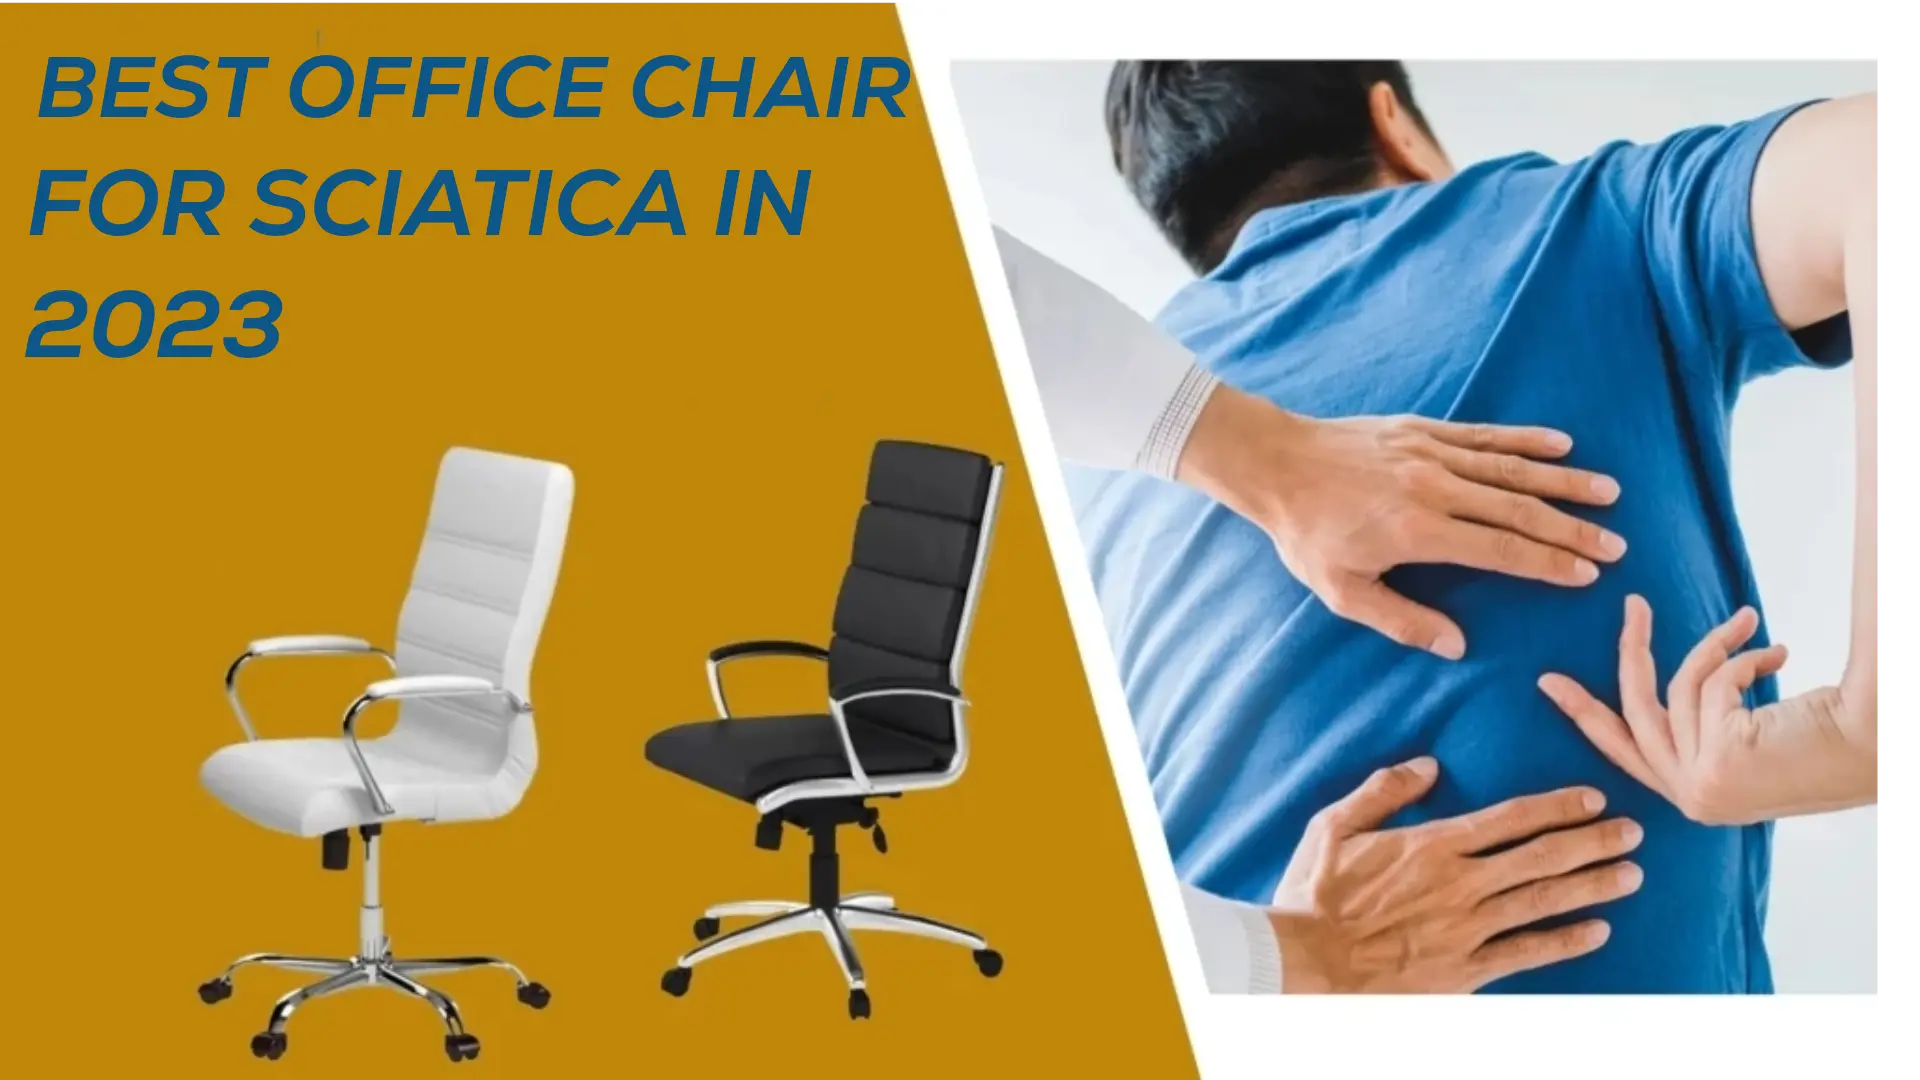 Best office chair for sciatica